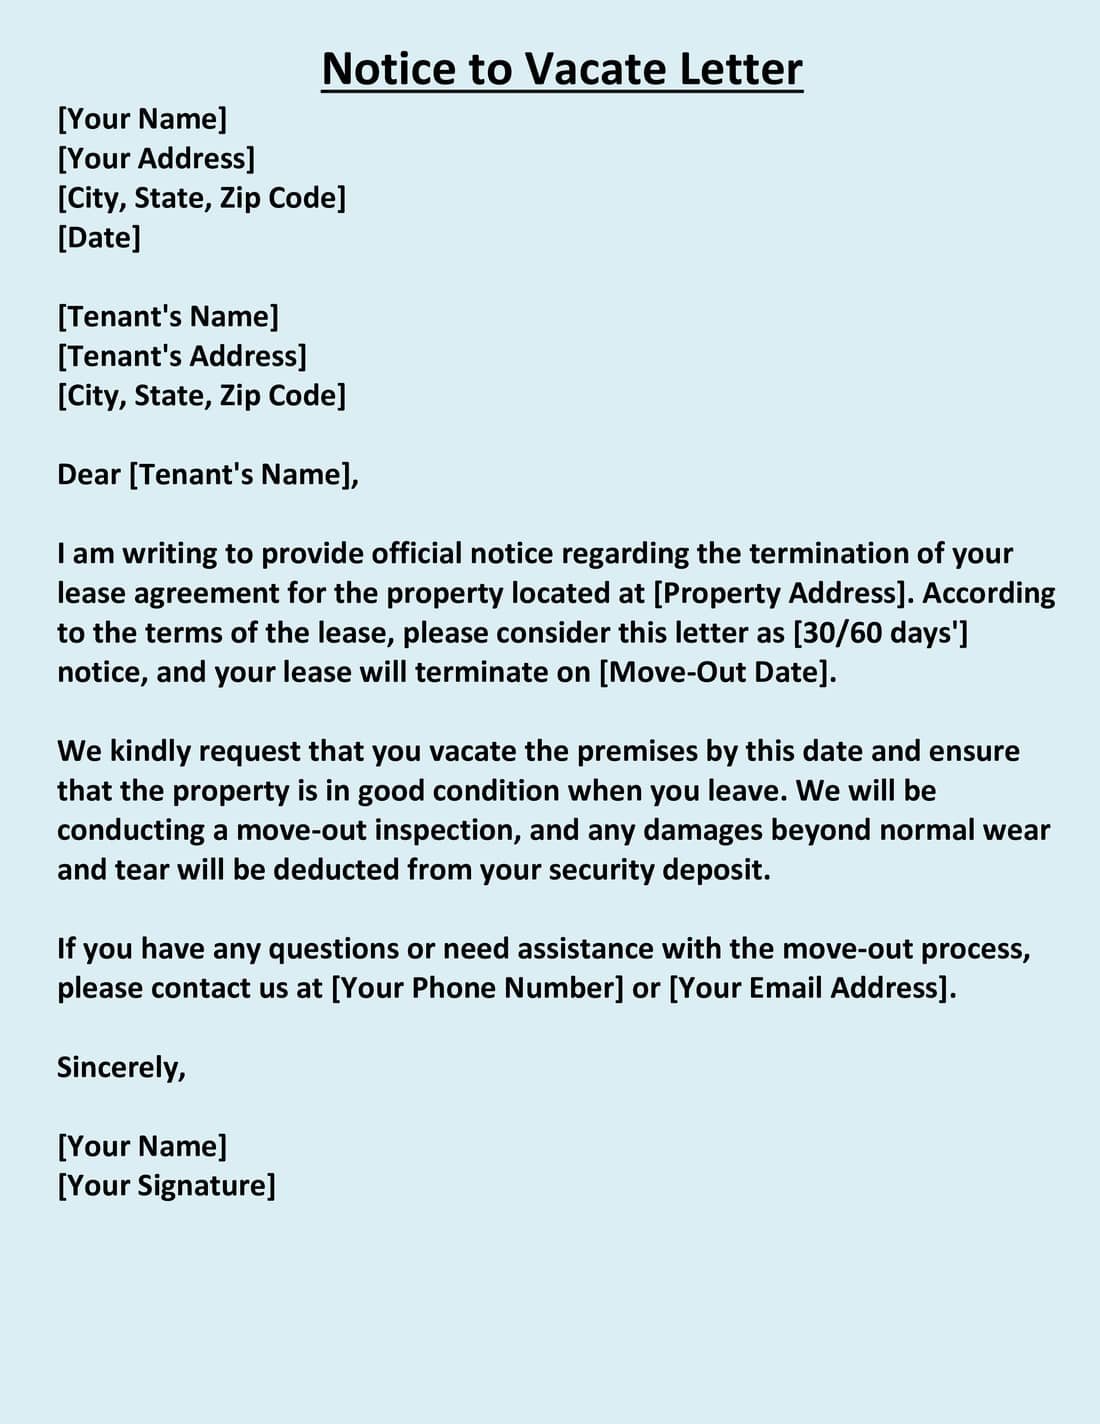 Notice to Vacate Letter